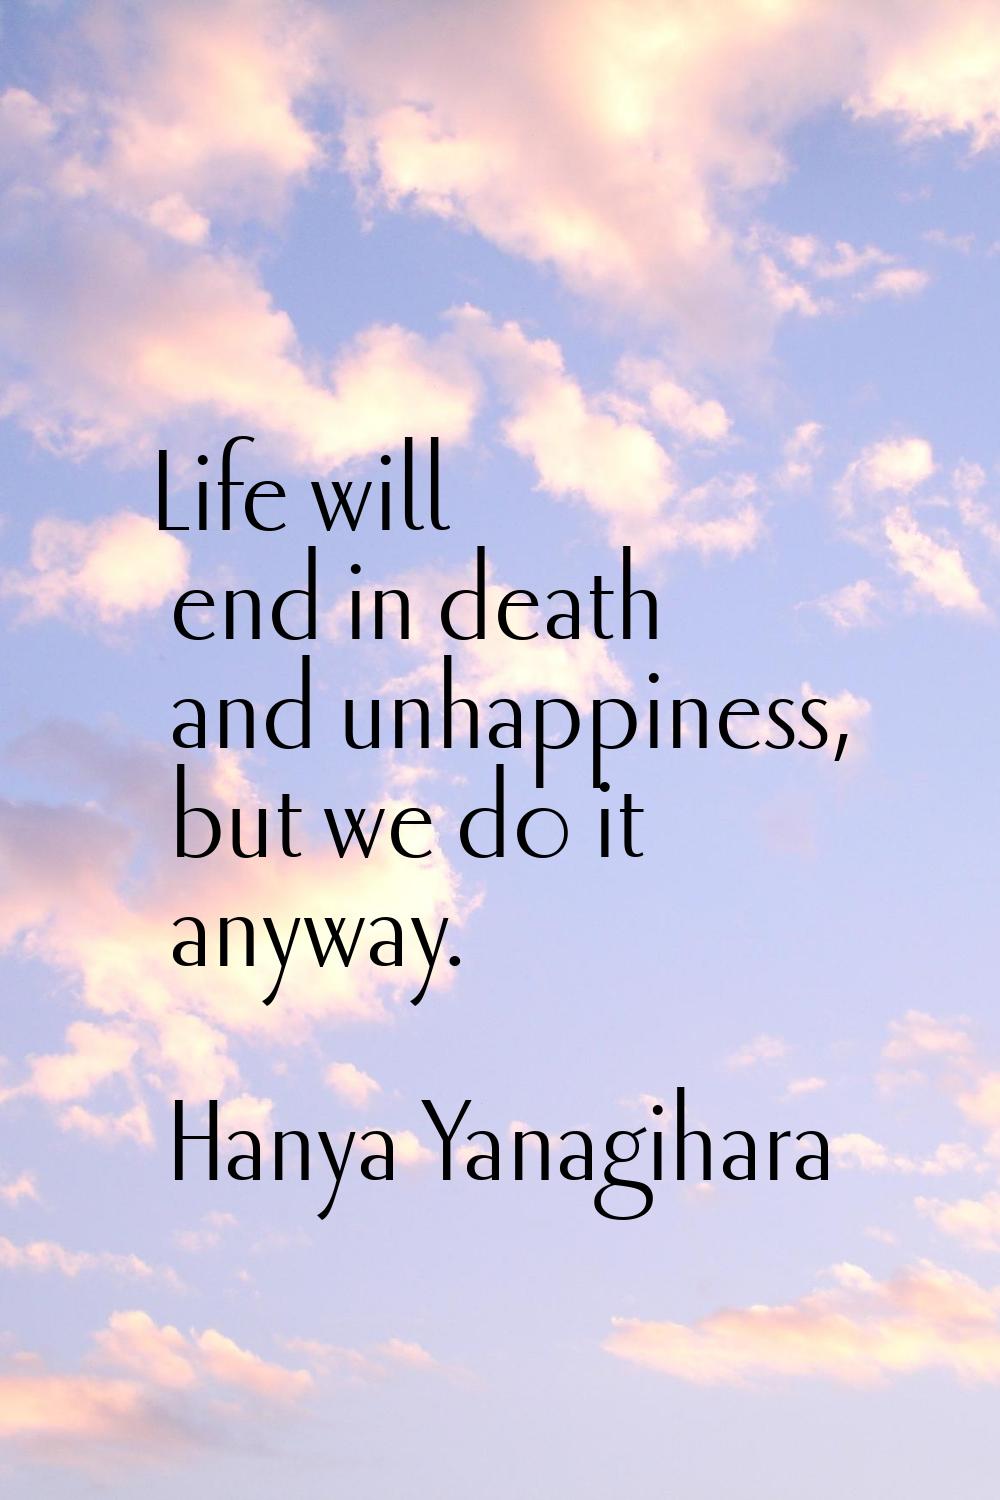 Life will end in death and unhappiness, but we do it anyway.